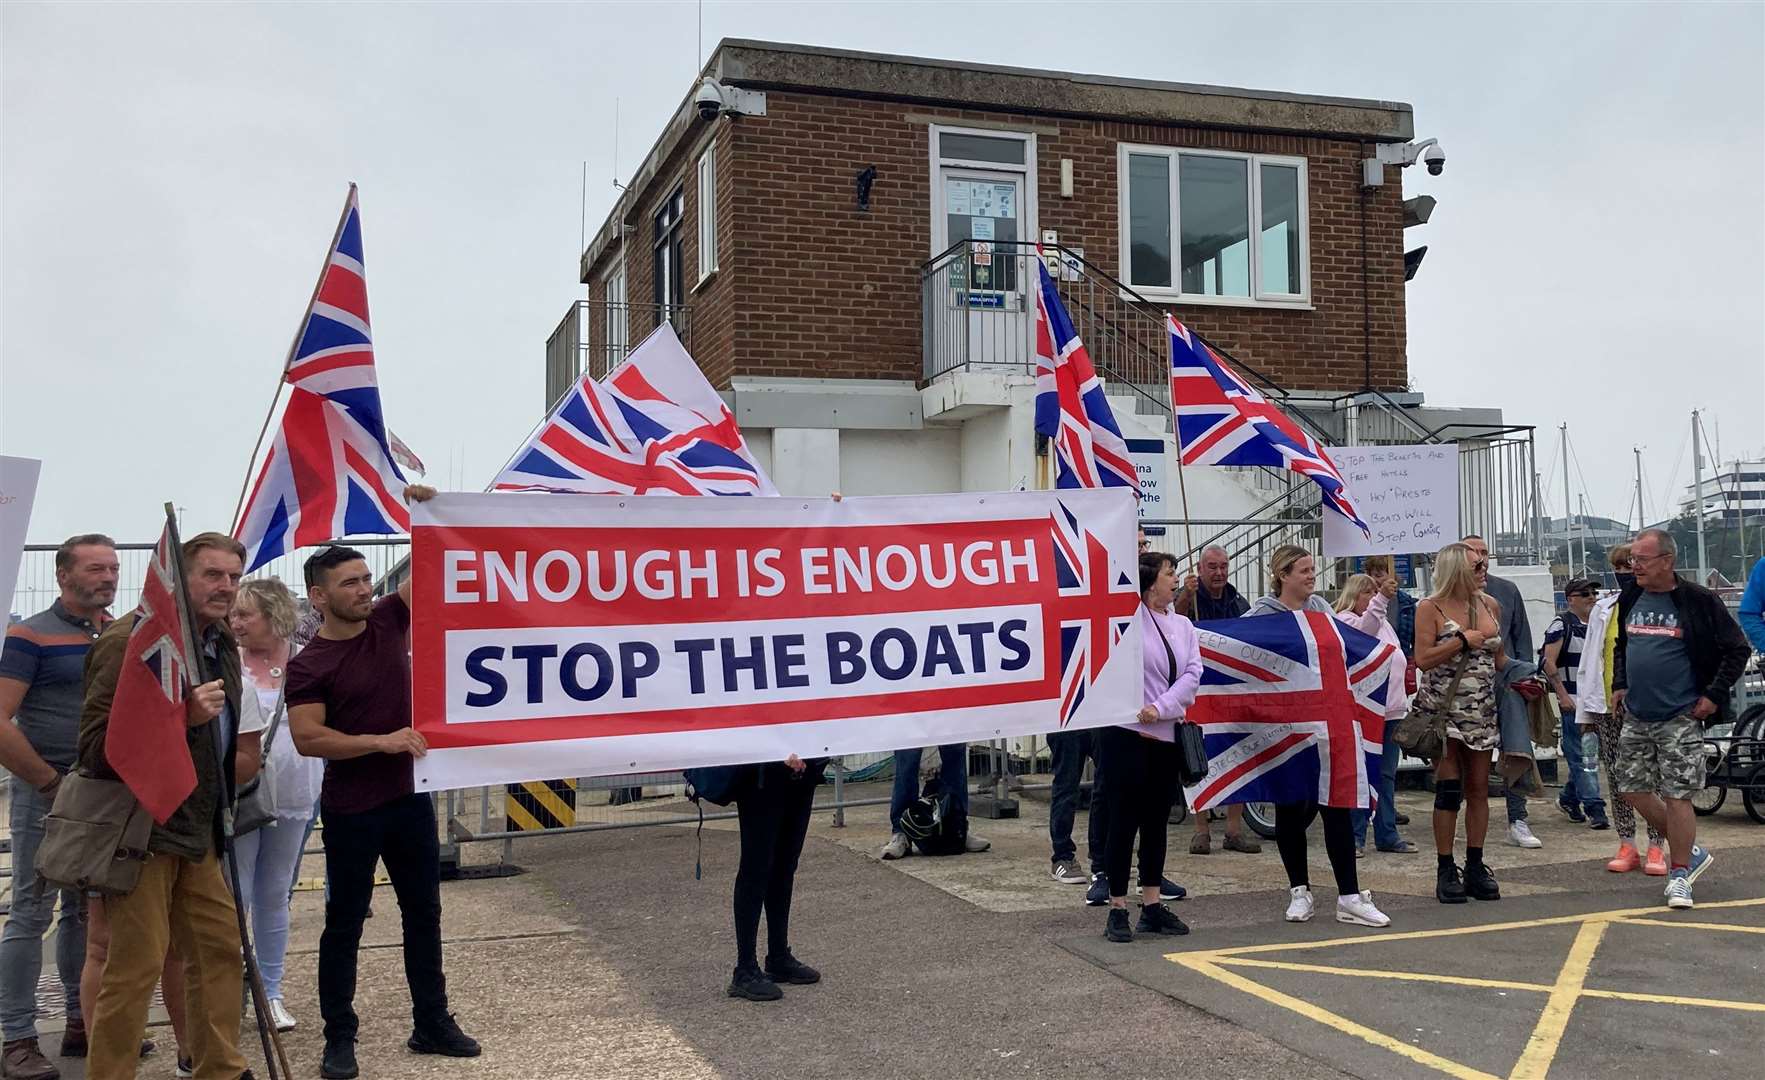 The protest happened outside the RNLI station in Dover marina